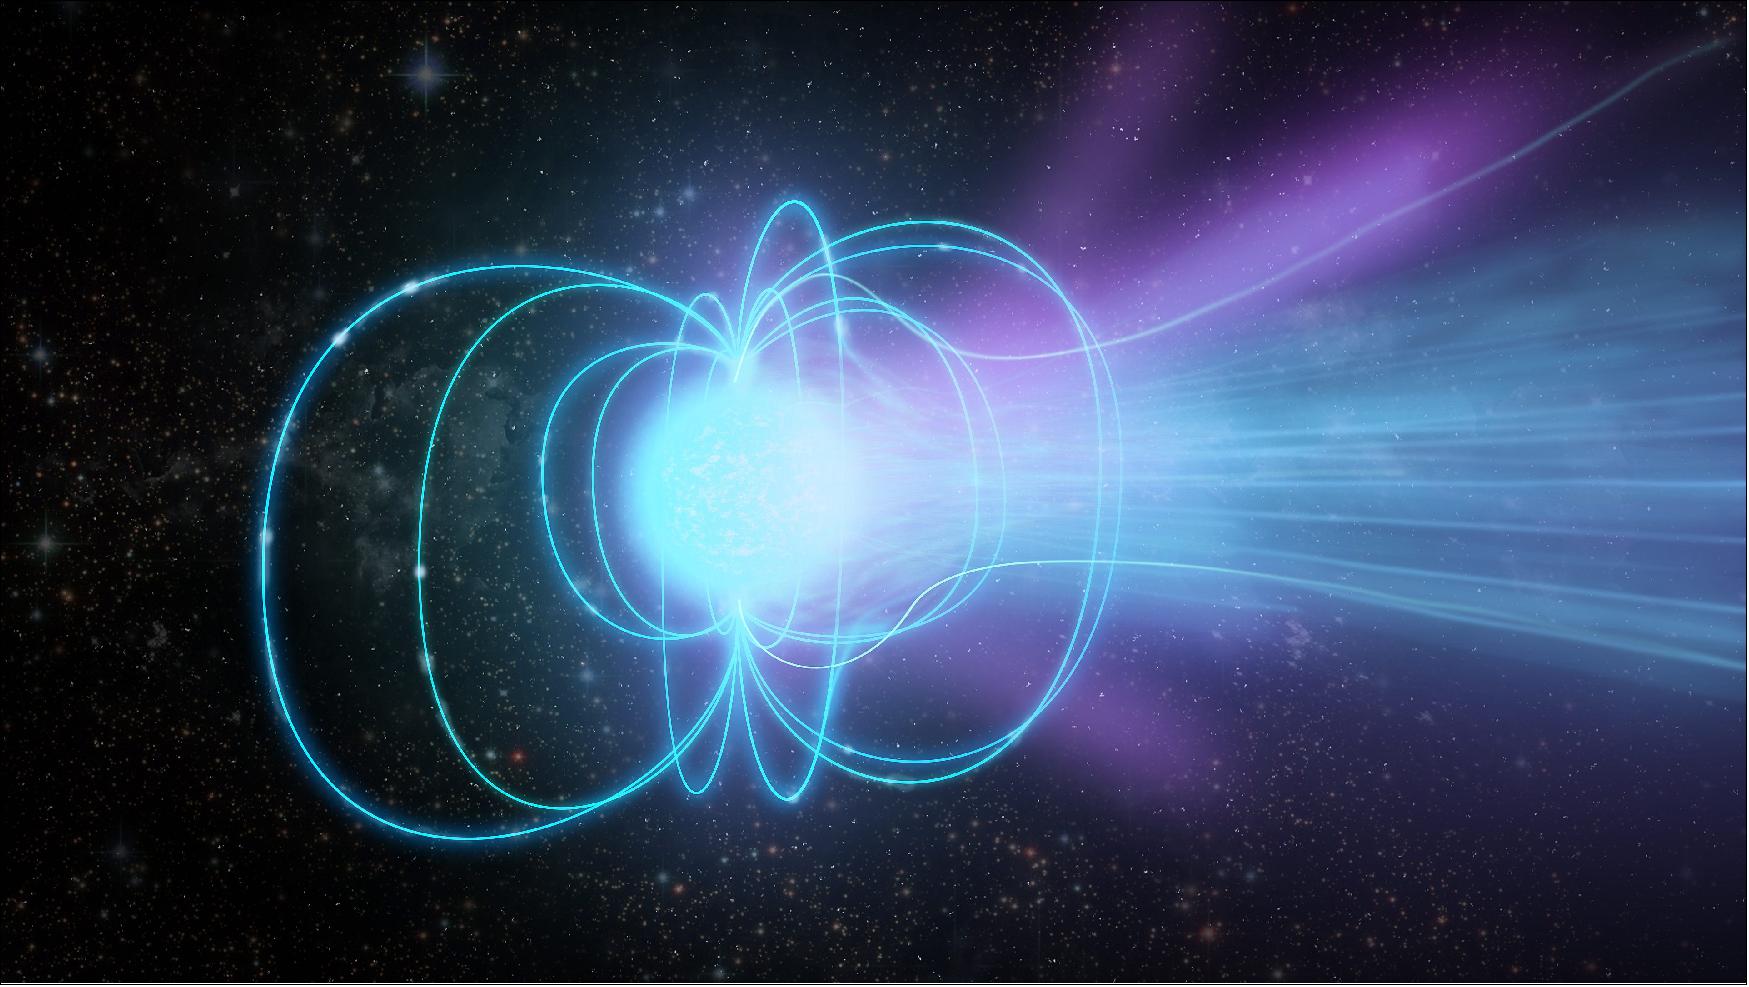 Figure 44: Artist's conception of a magnetar — a superdense neutron star with an extremely strong magnetic field. In this illustration, the magnetar is emitting a burst of radiation (image credit: Sophia Dagnello, NRAO/AUI/NSF)